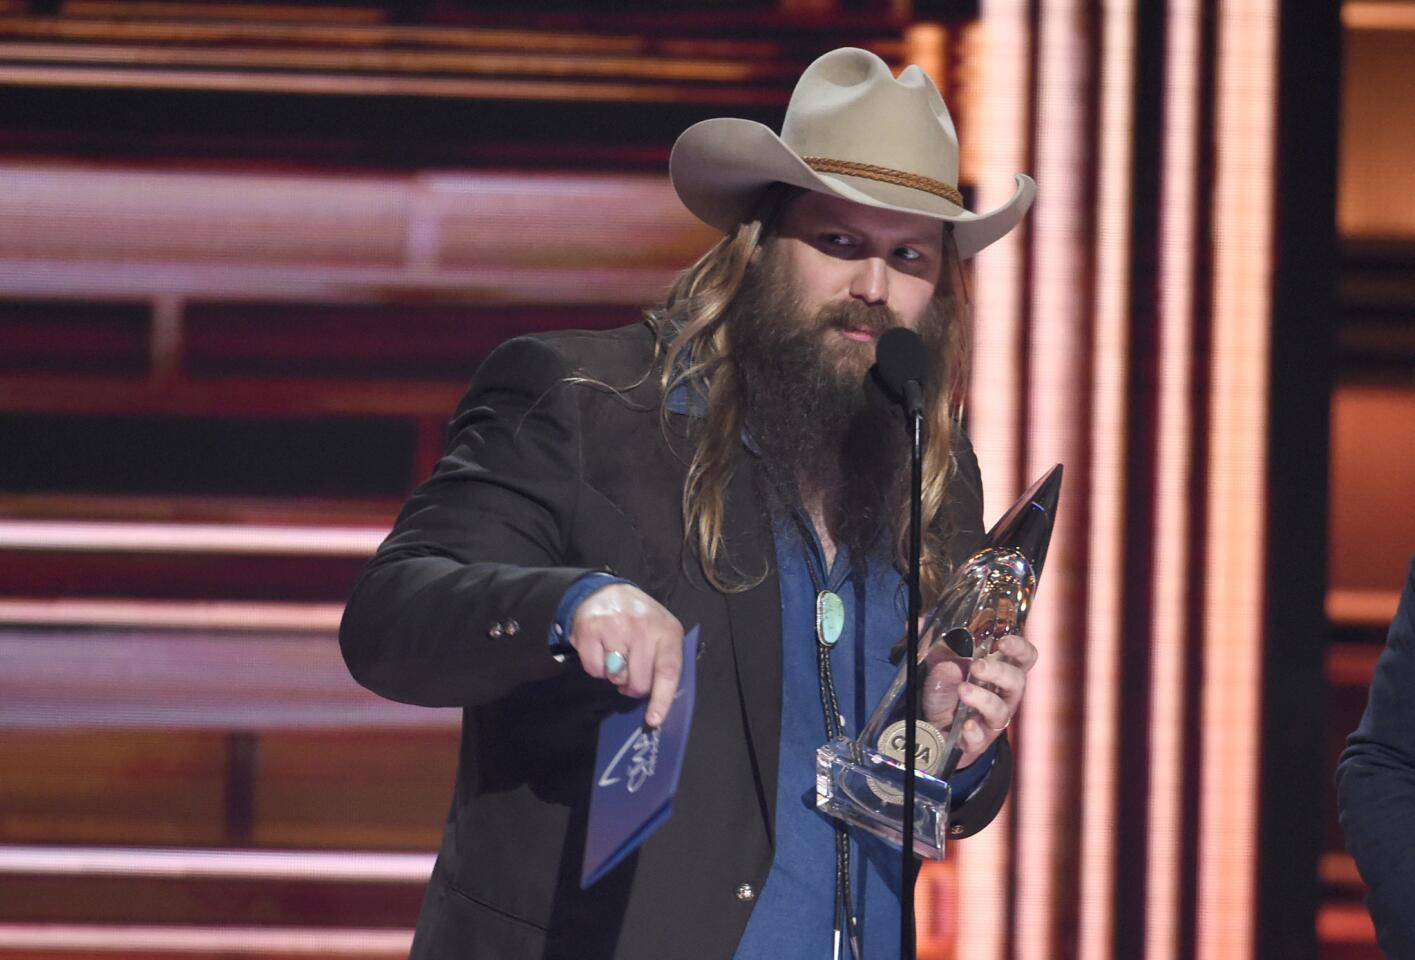 Chris Stapleton accepts the award for album of the year "From A Room: Volume 1."